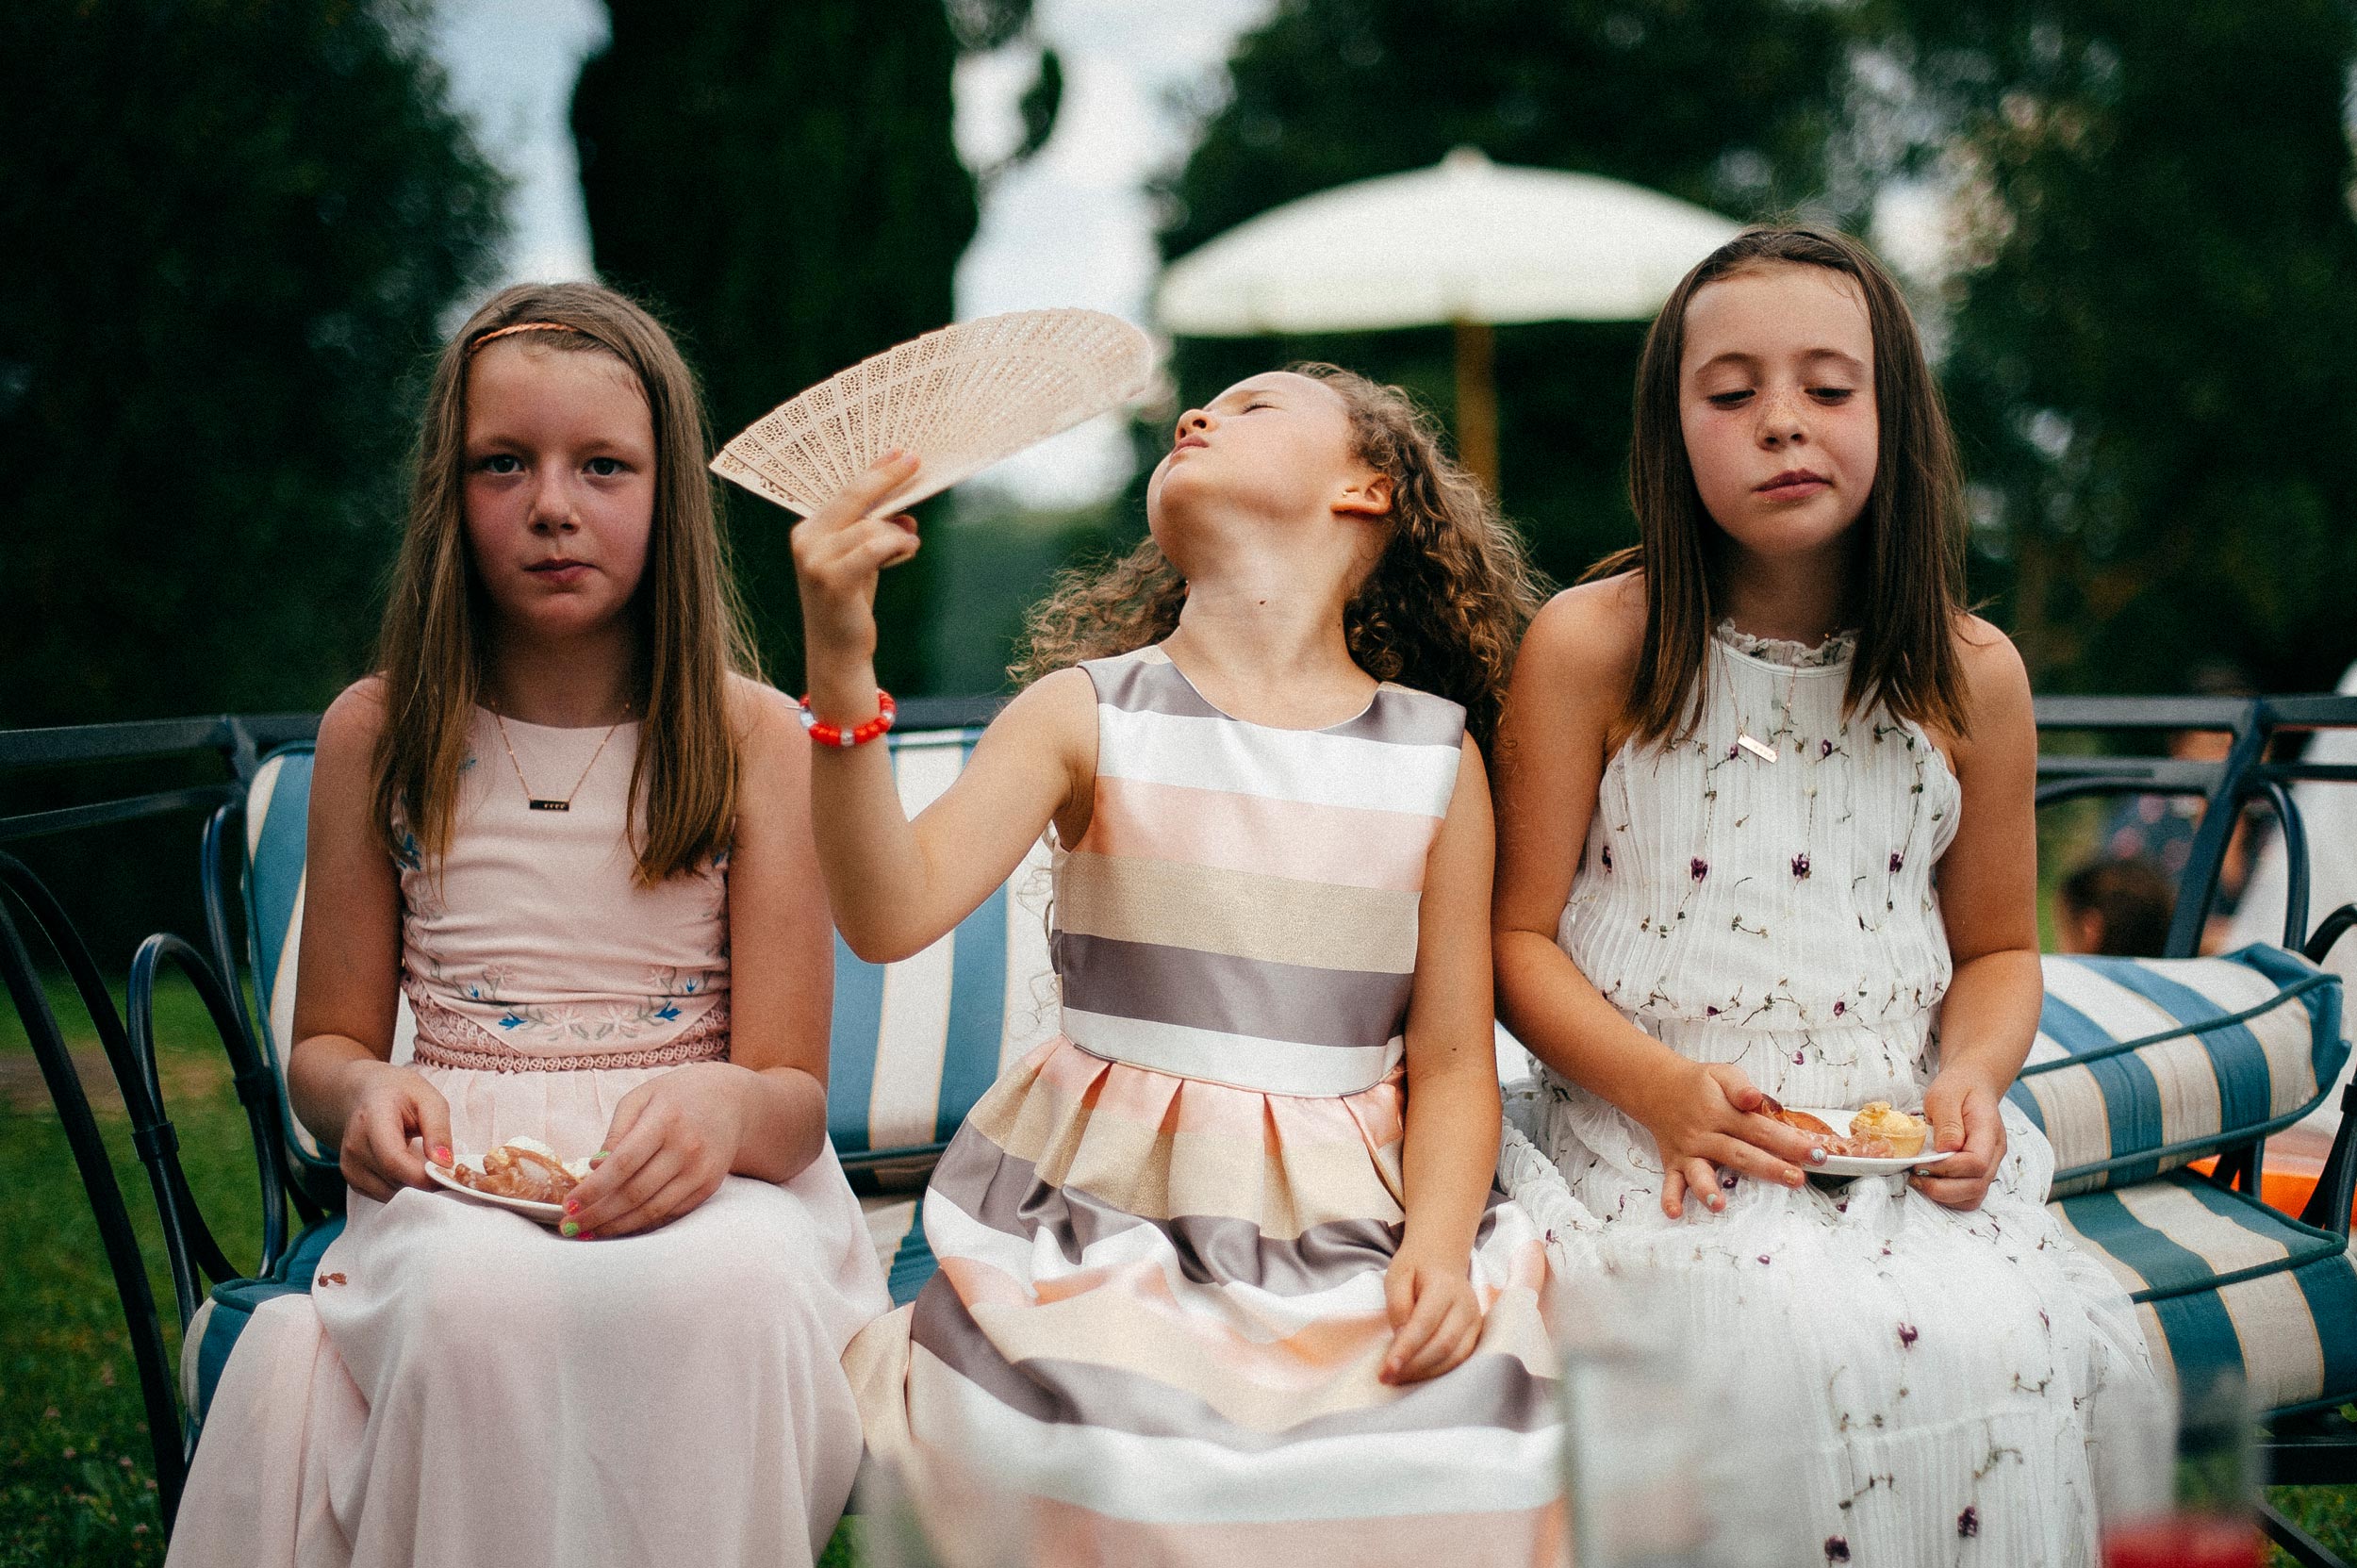 girls-at-the-reception-using-fan-hot-weather-documentary-wedding-photography-in-tuscany-by-Alessandro-Avenali.jpg